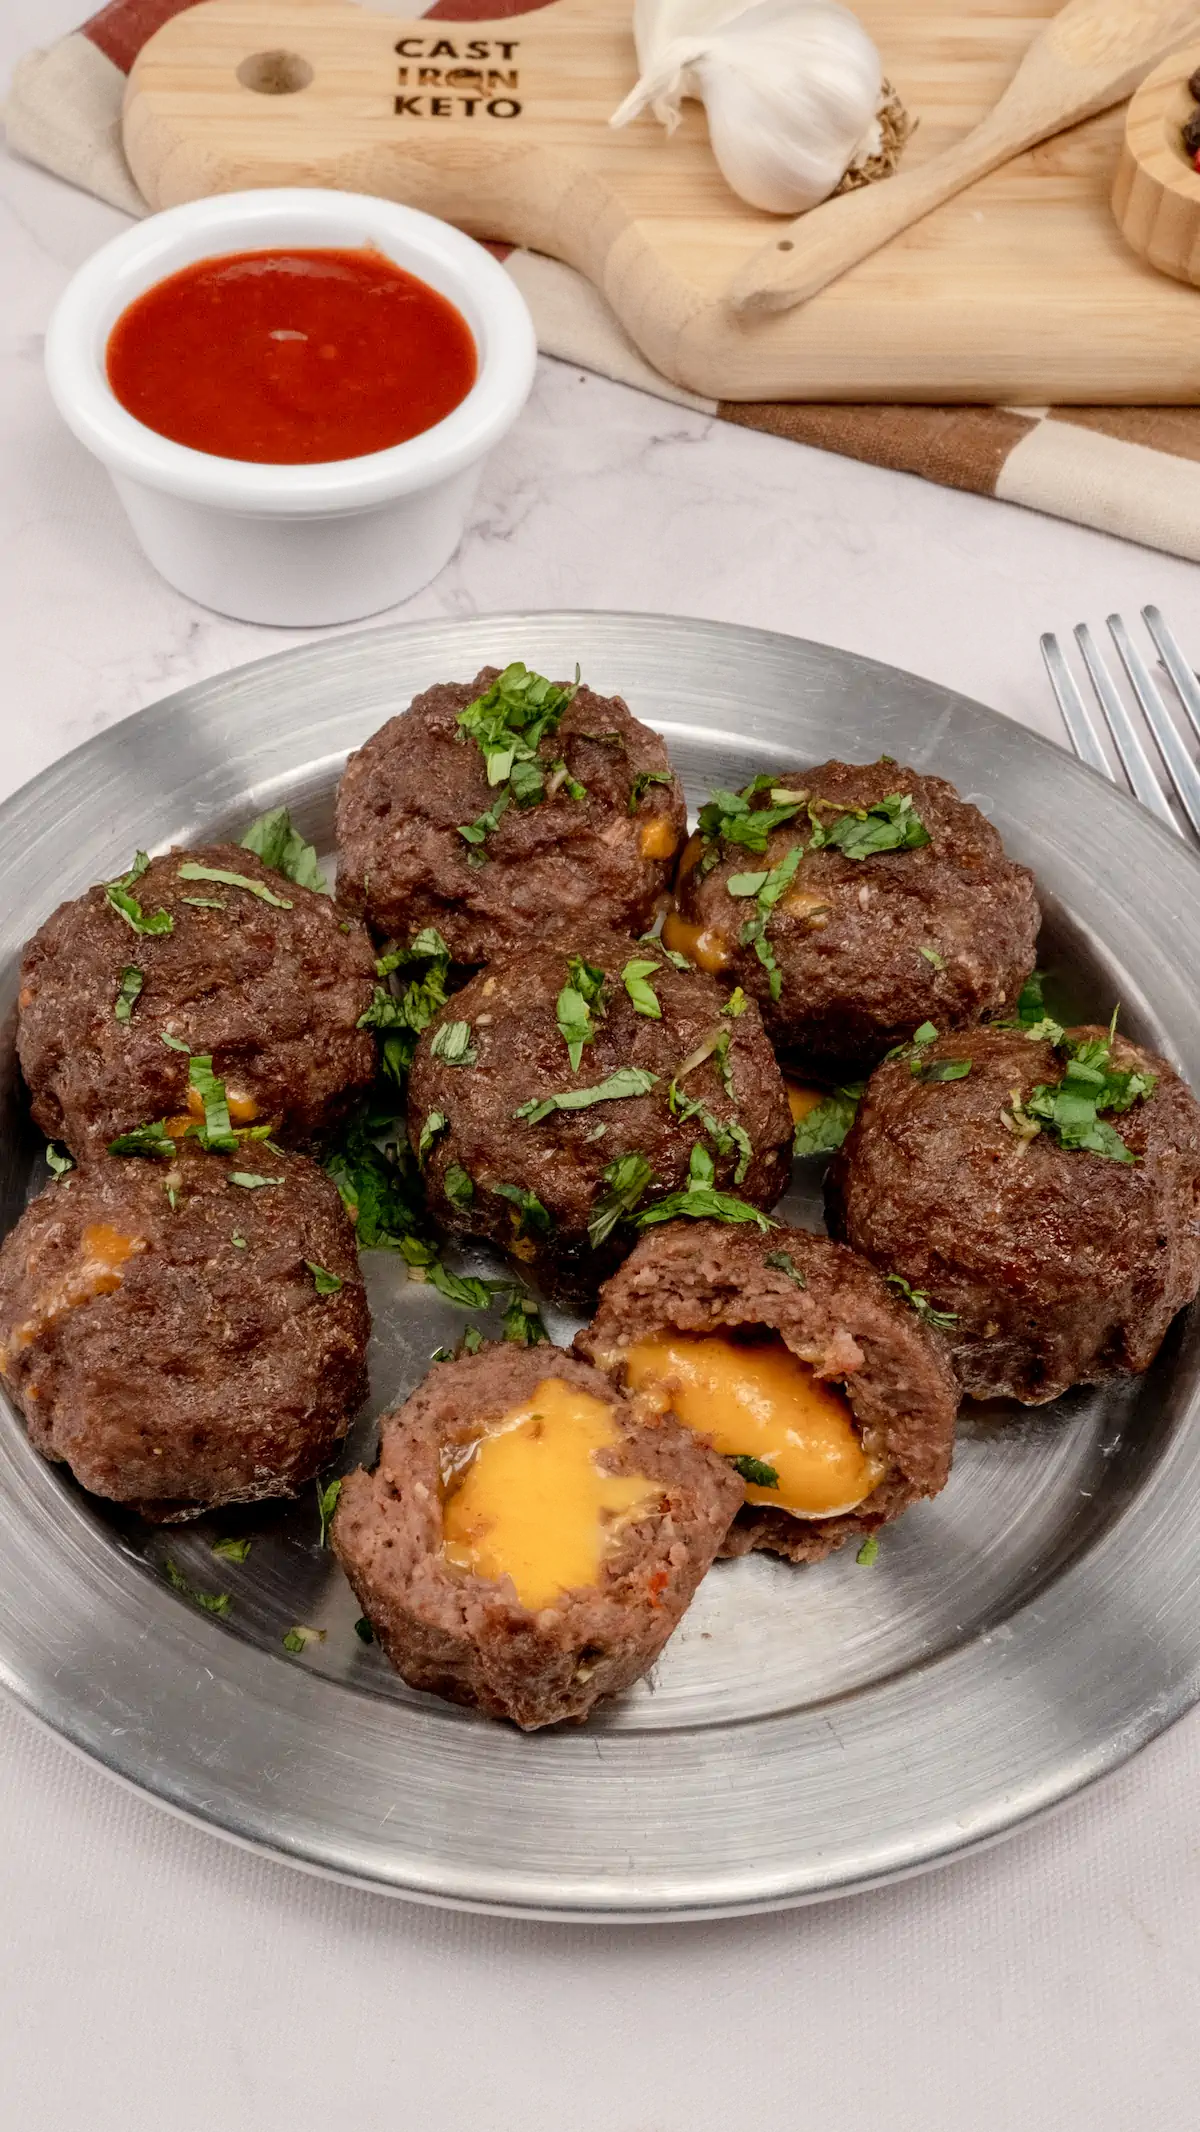 Cheese-filled meatballs served on a plate alongside a sauce in a bowl.